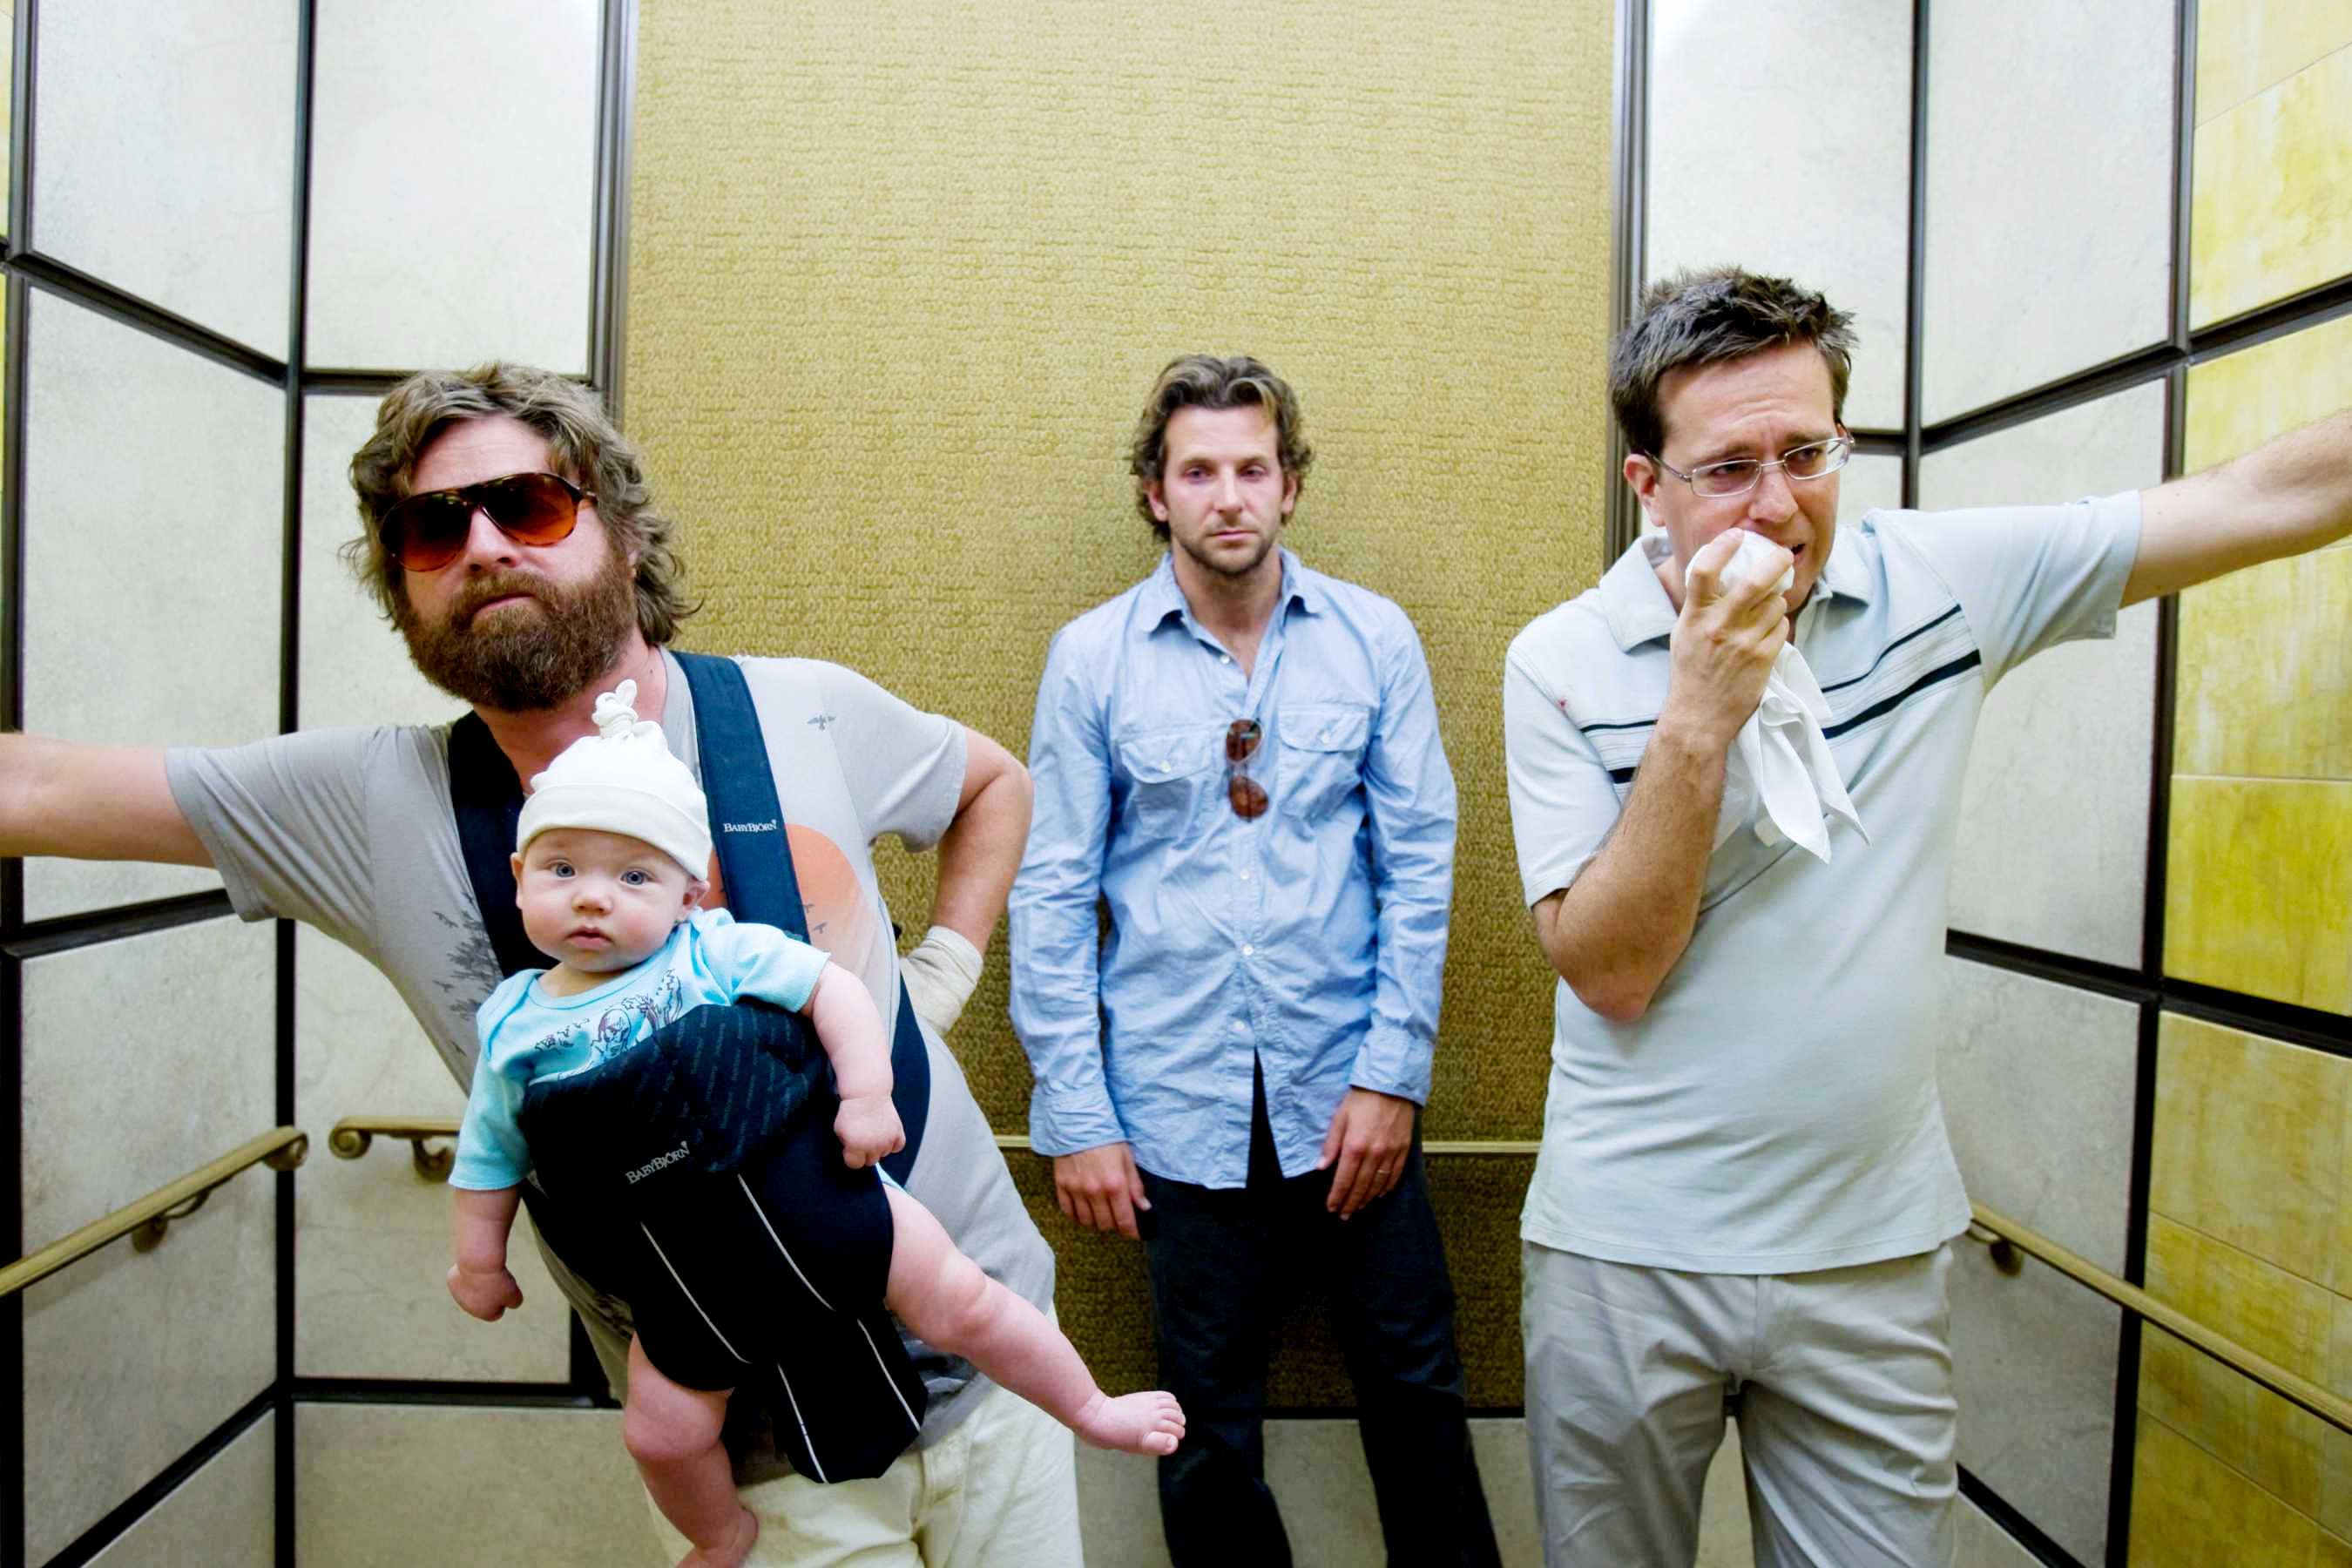 Zach Galifianakis, Bradley Cooper and Ed Helms in Warner Bros. Pictures' The Hangover (2009). Photo credit by Frank Masi.